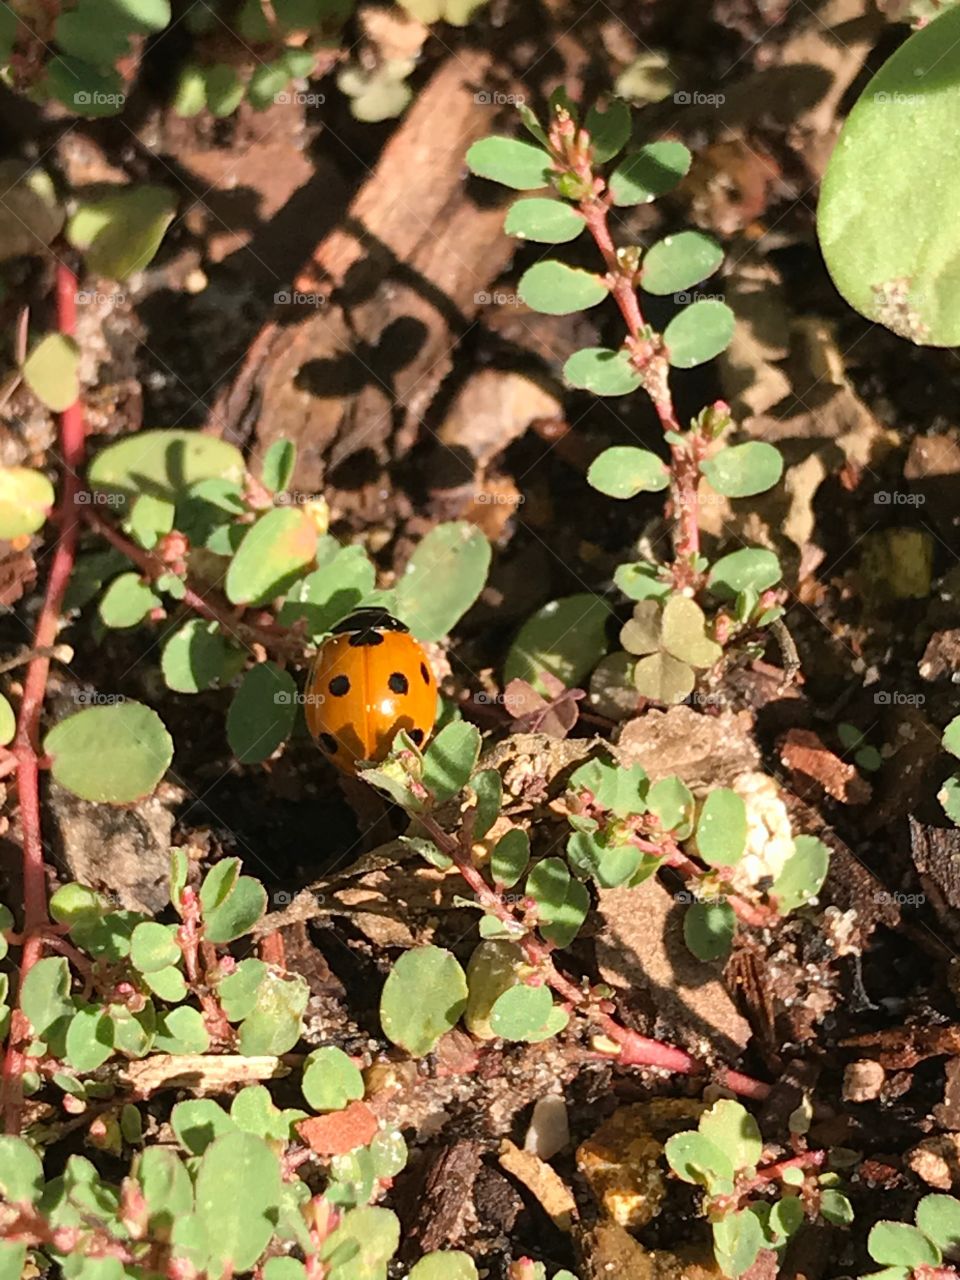 Lone Ladybug in the Flower Bed